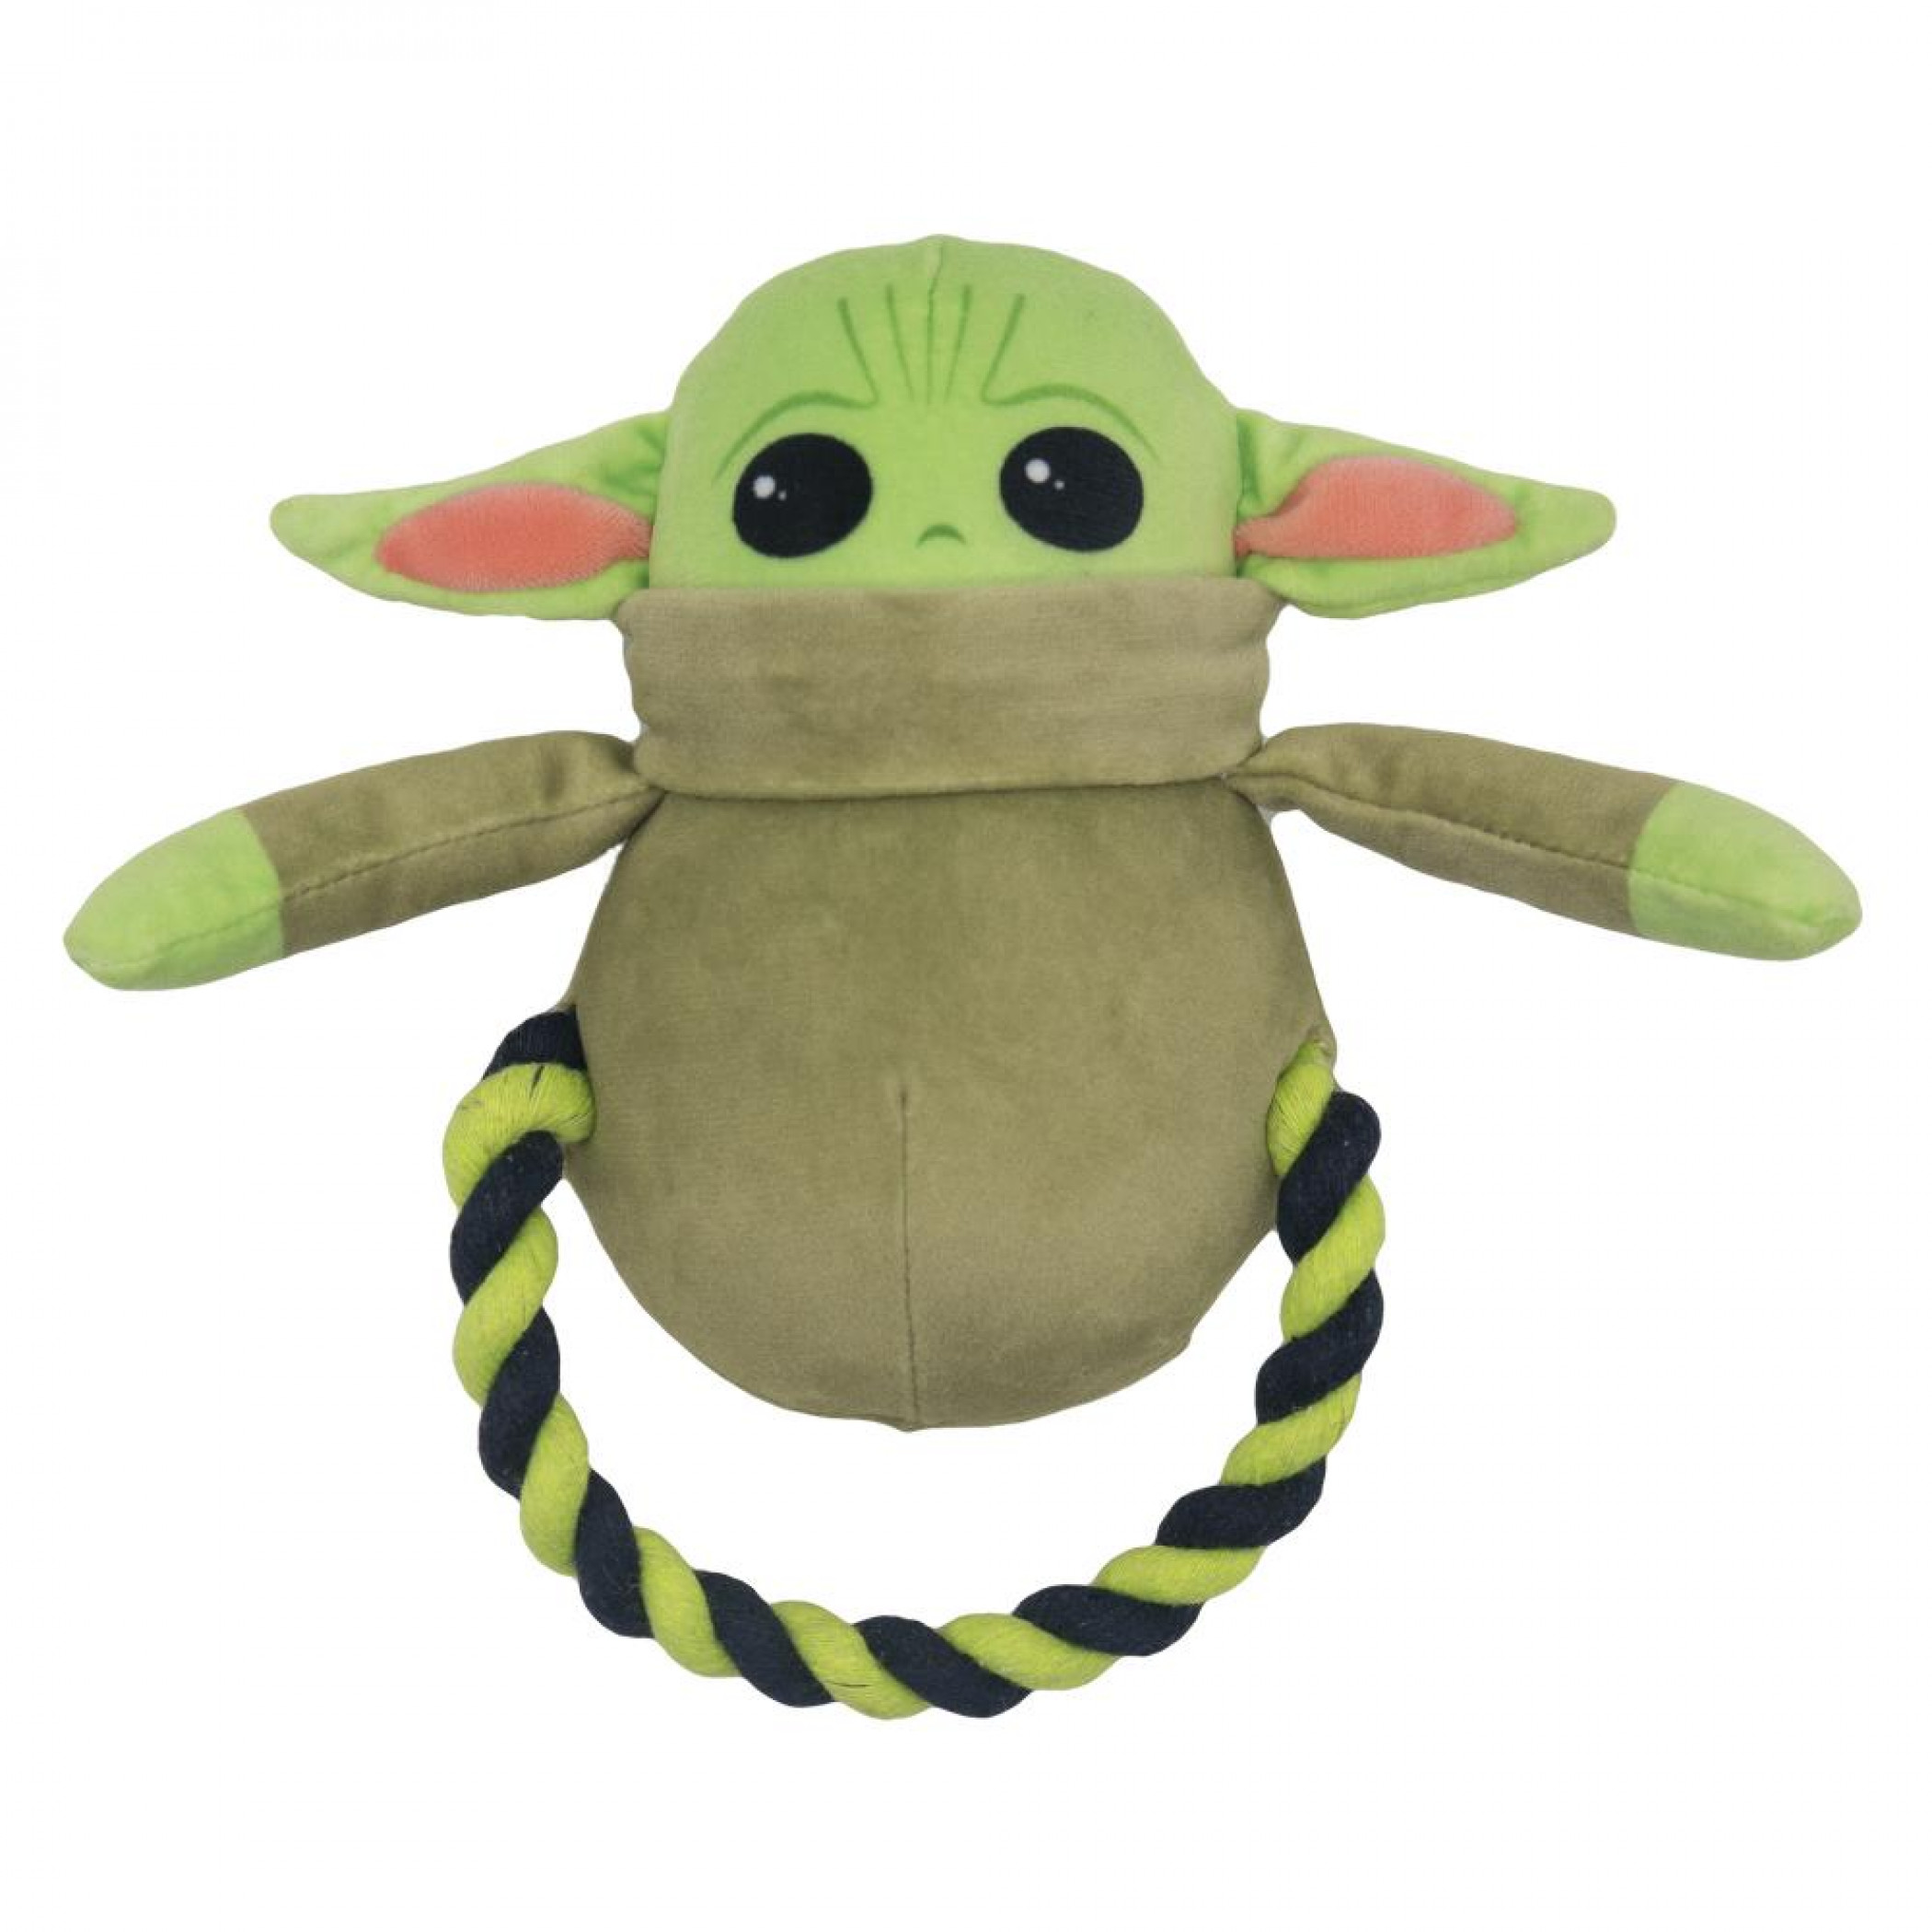 Star Wars The Child Grogu Shaped Plush and Rope Dog Toy